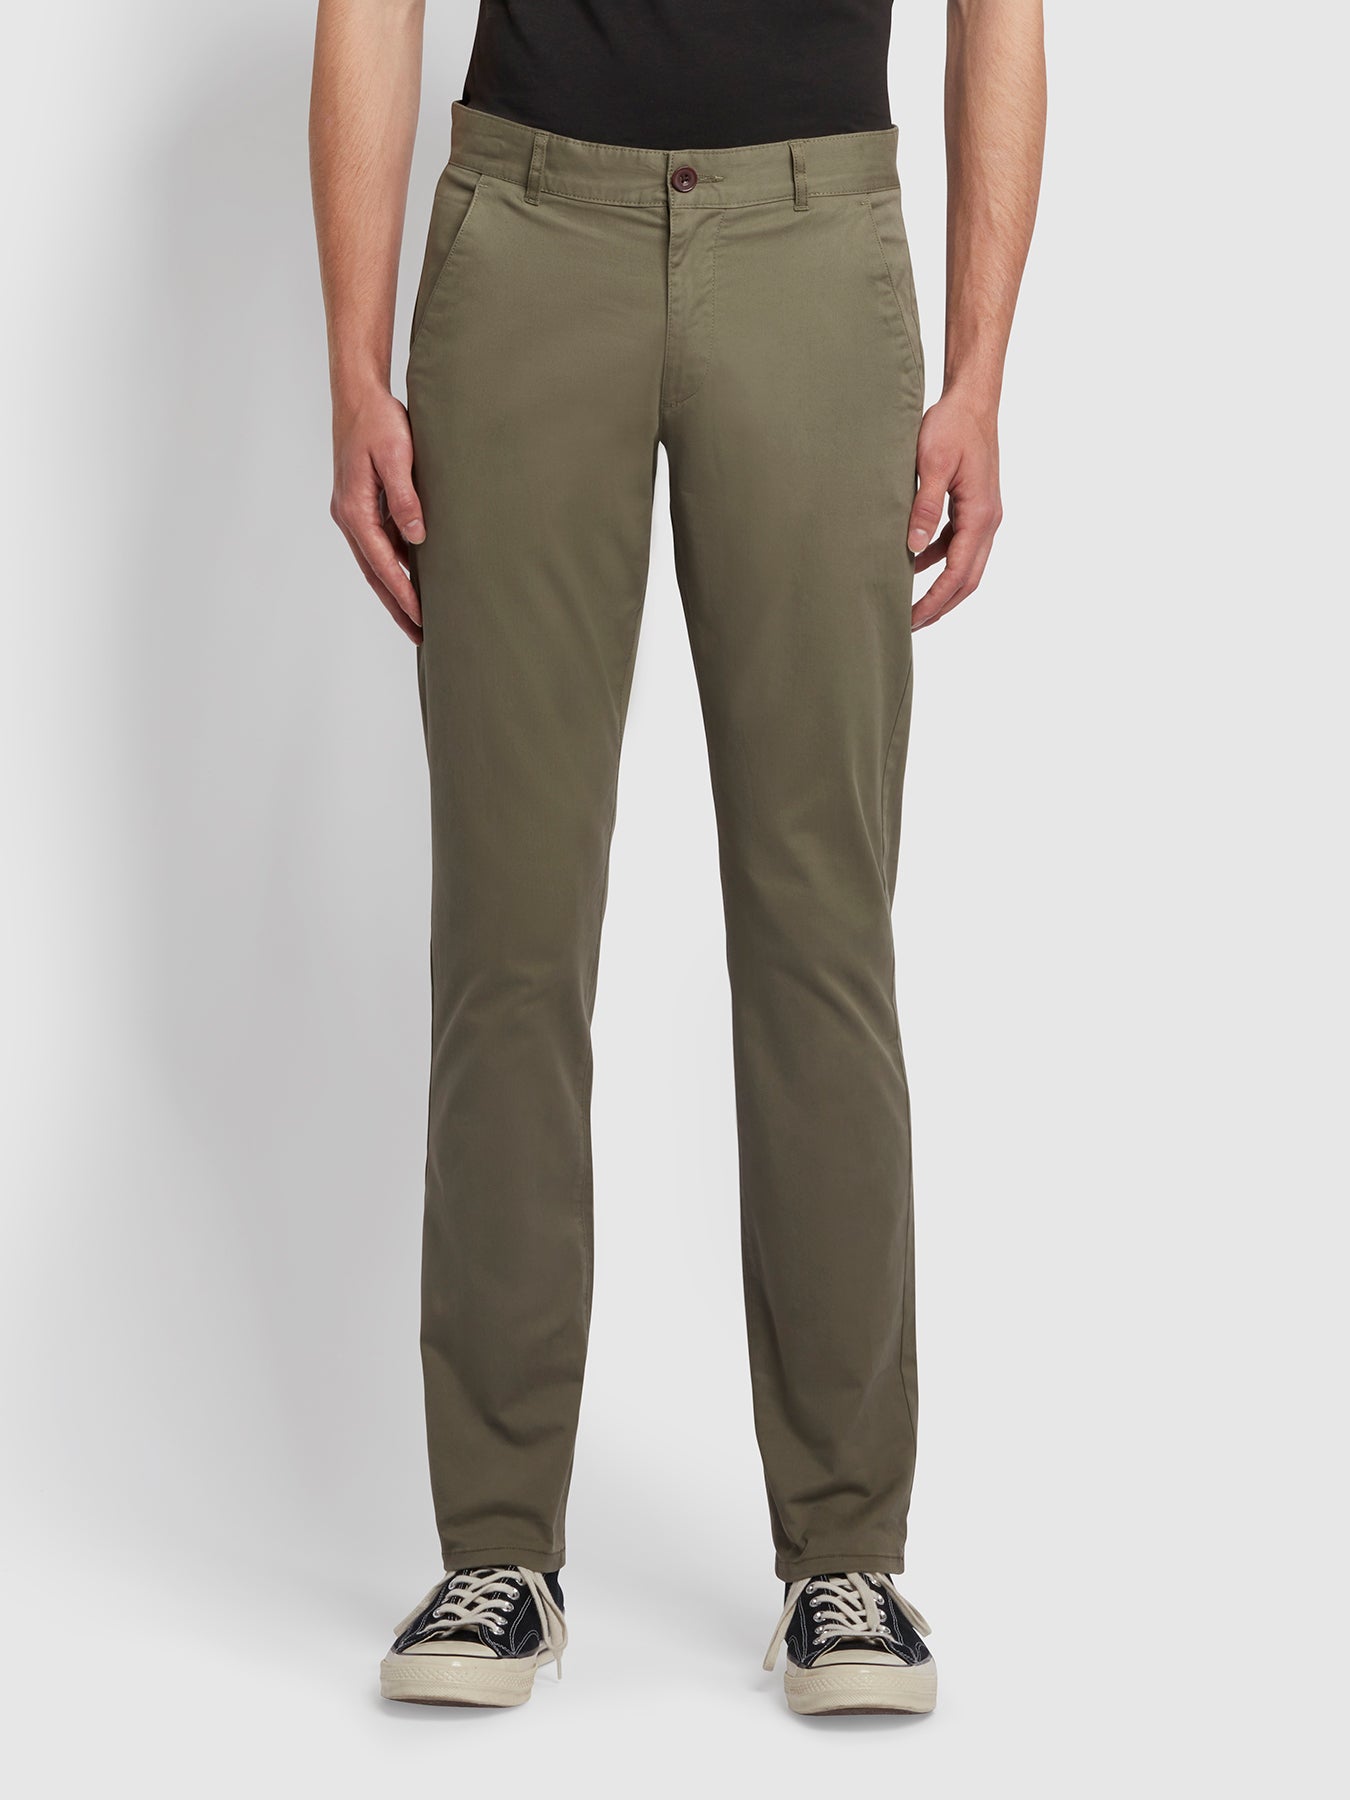 View Elm Regular Fit Organic Cotton Twill Chinos In Vintage Green information